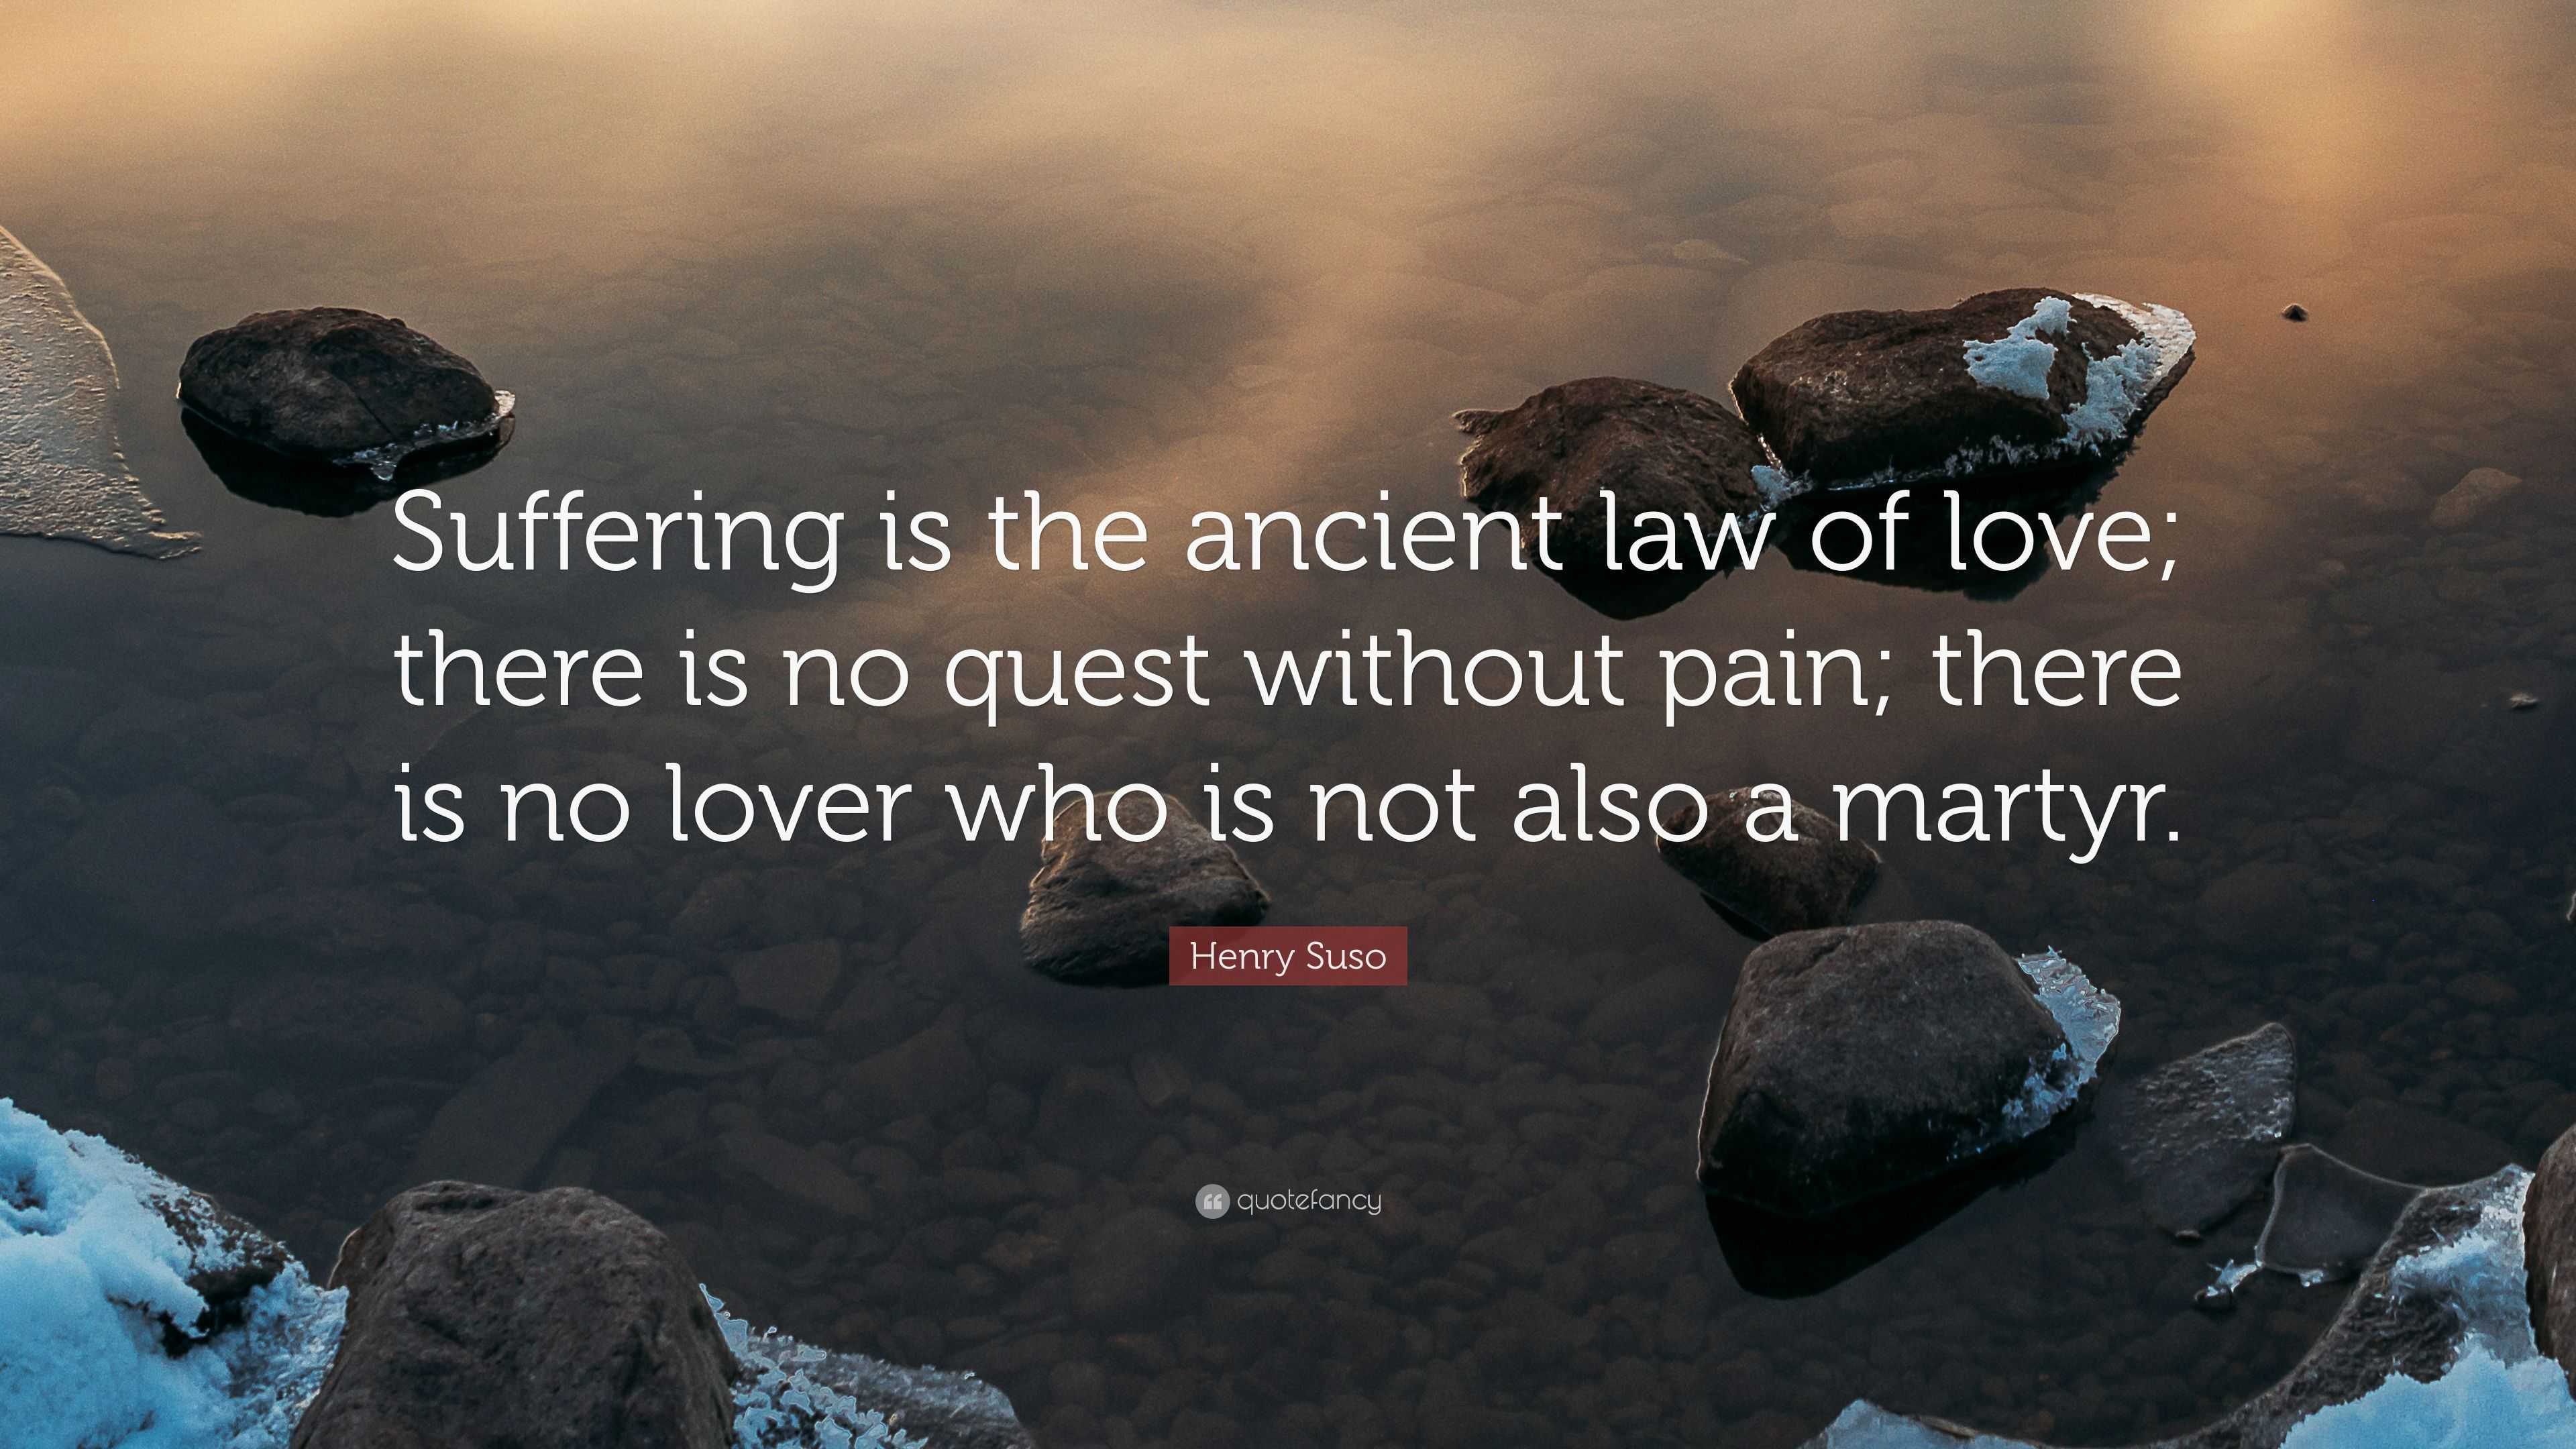 Henry Suso Quote “Suffering is the ancient law of love